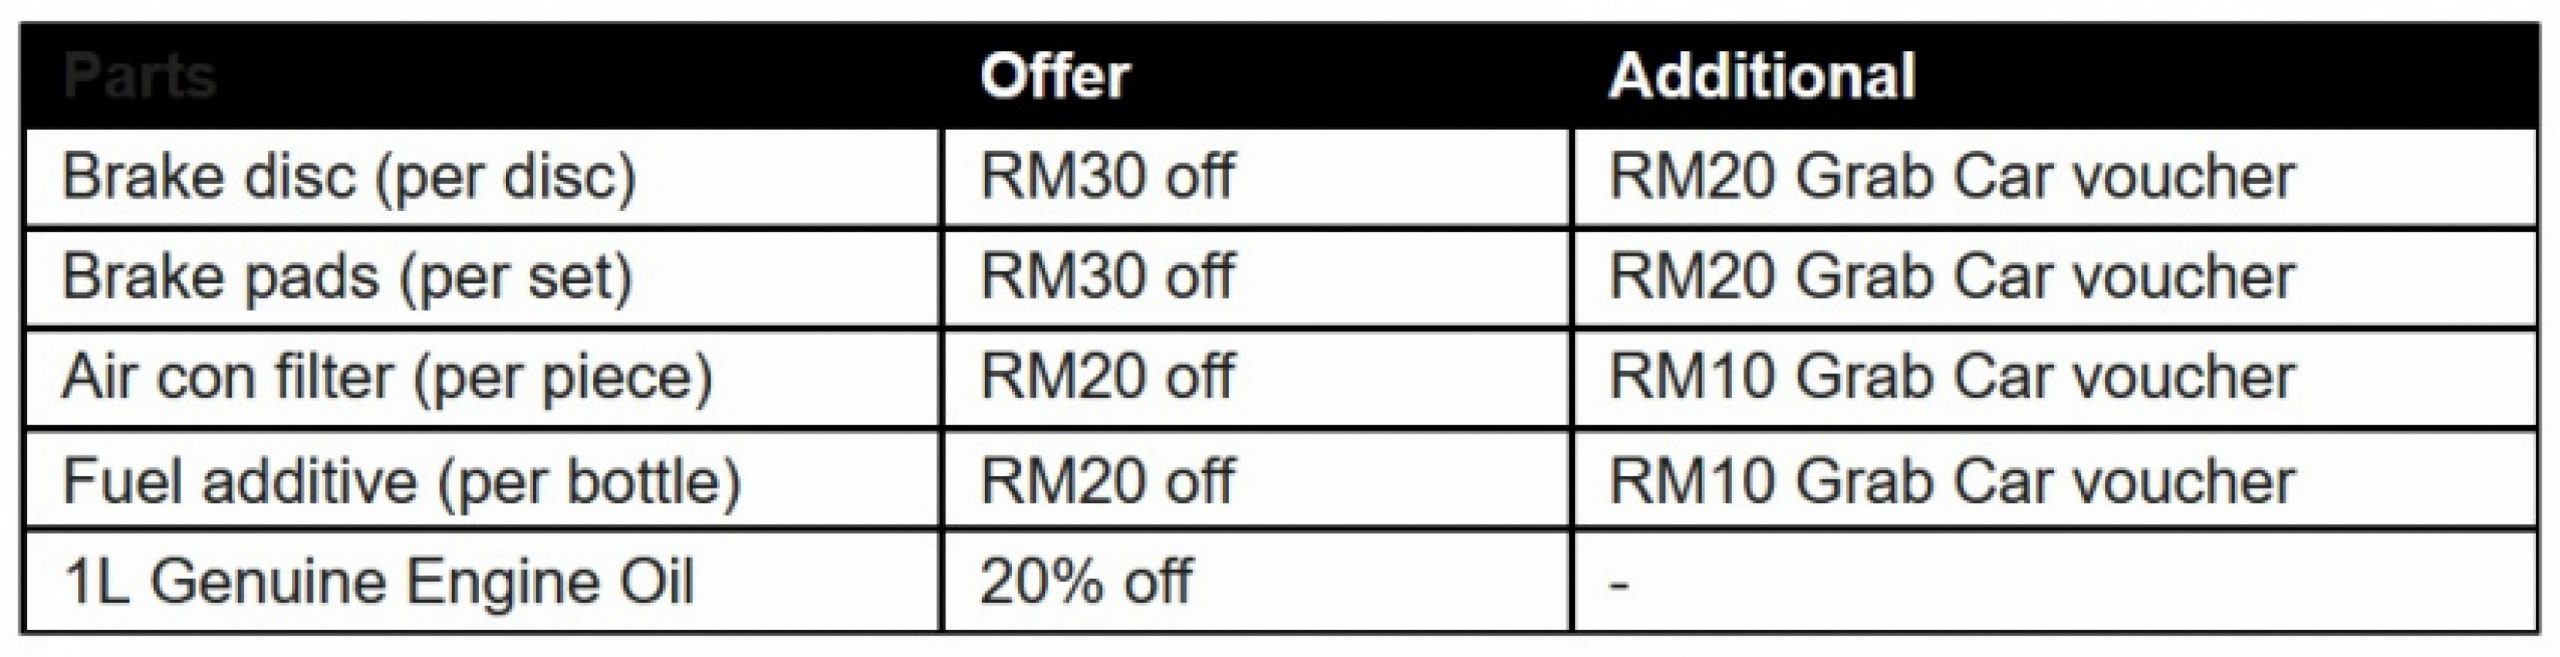 autos, car brands, cars, volkswagen, aftersales, automotive, cars, deals, malaysia, promotions, rebates, sales, volkswagen passenger cars malaysia, volkswagen malaysia offers chinese new year deals on new cars and aftersales service